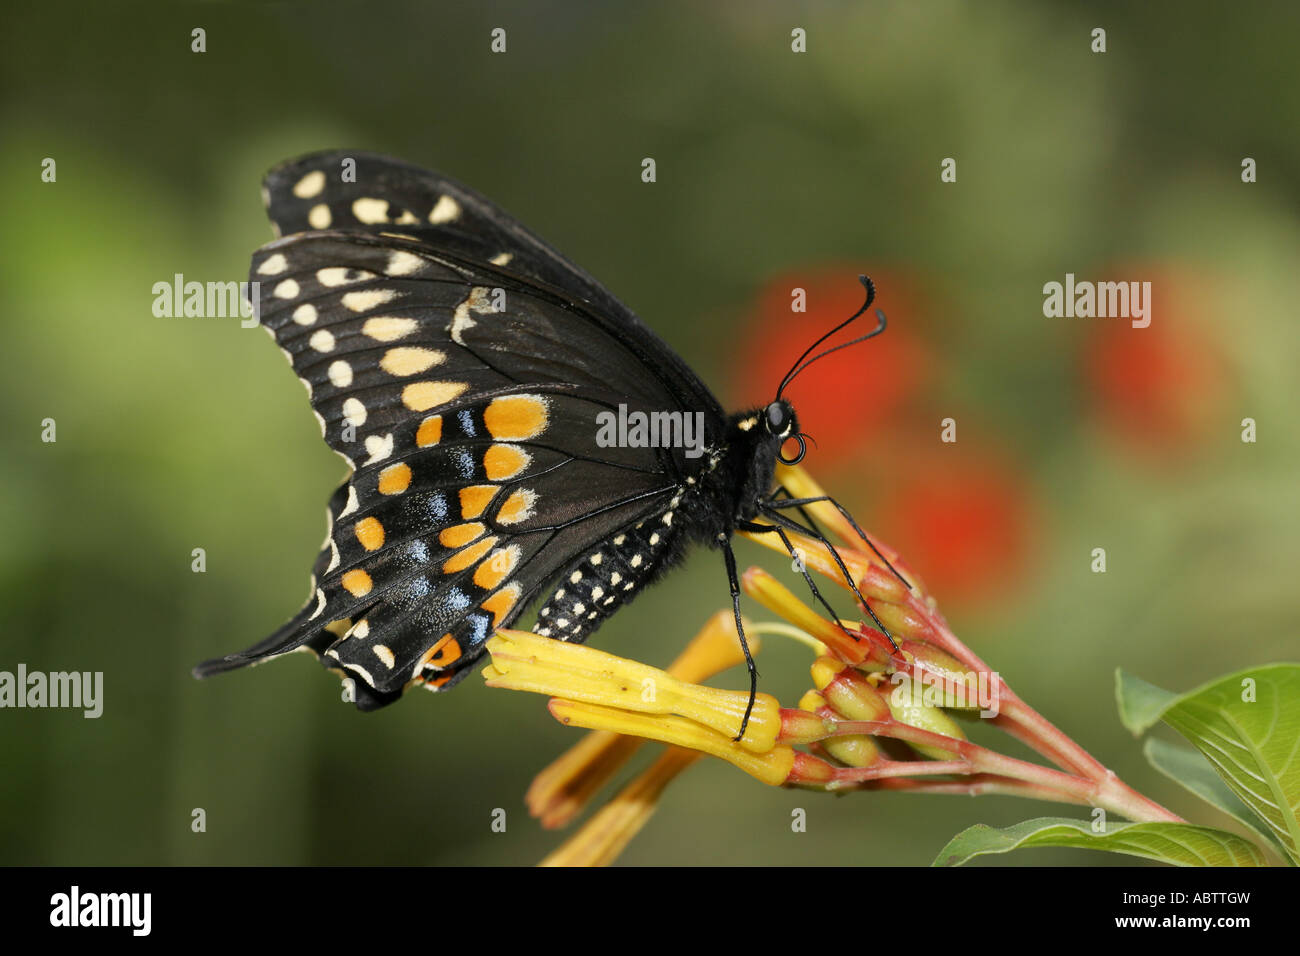 Black Swallowtail buttefly in profile view Stock Photo